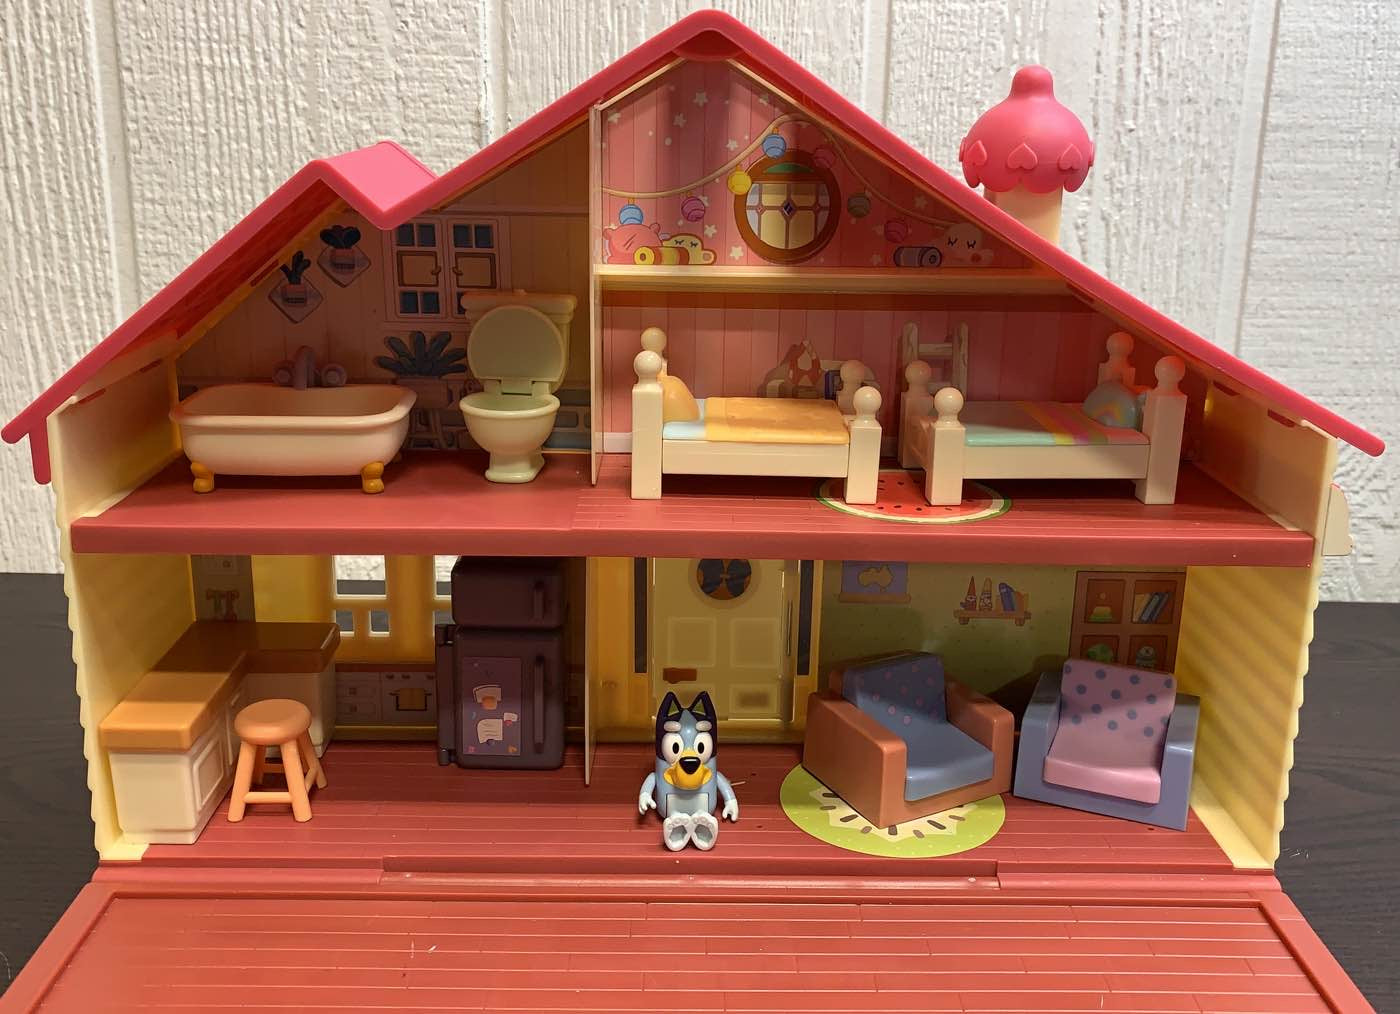 Bluey Family Home Playset with 2.5 poseable Figure